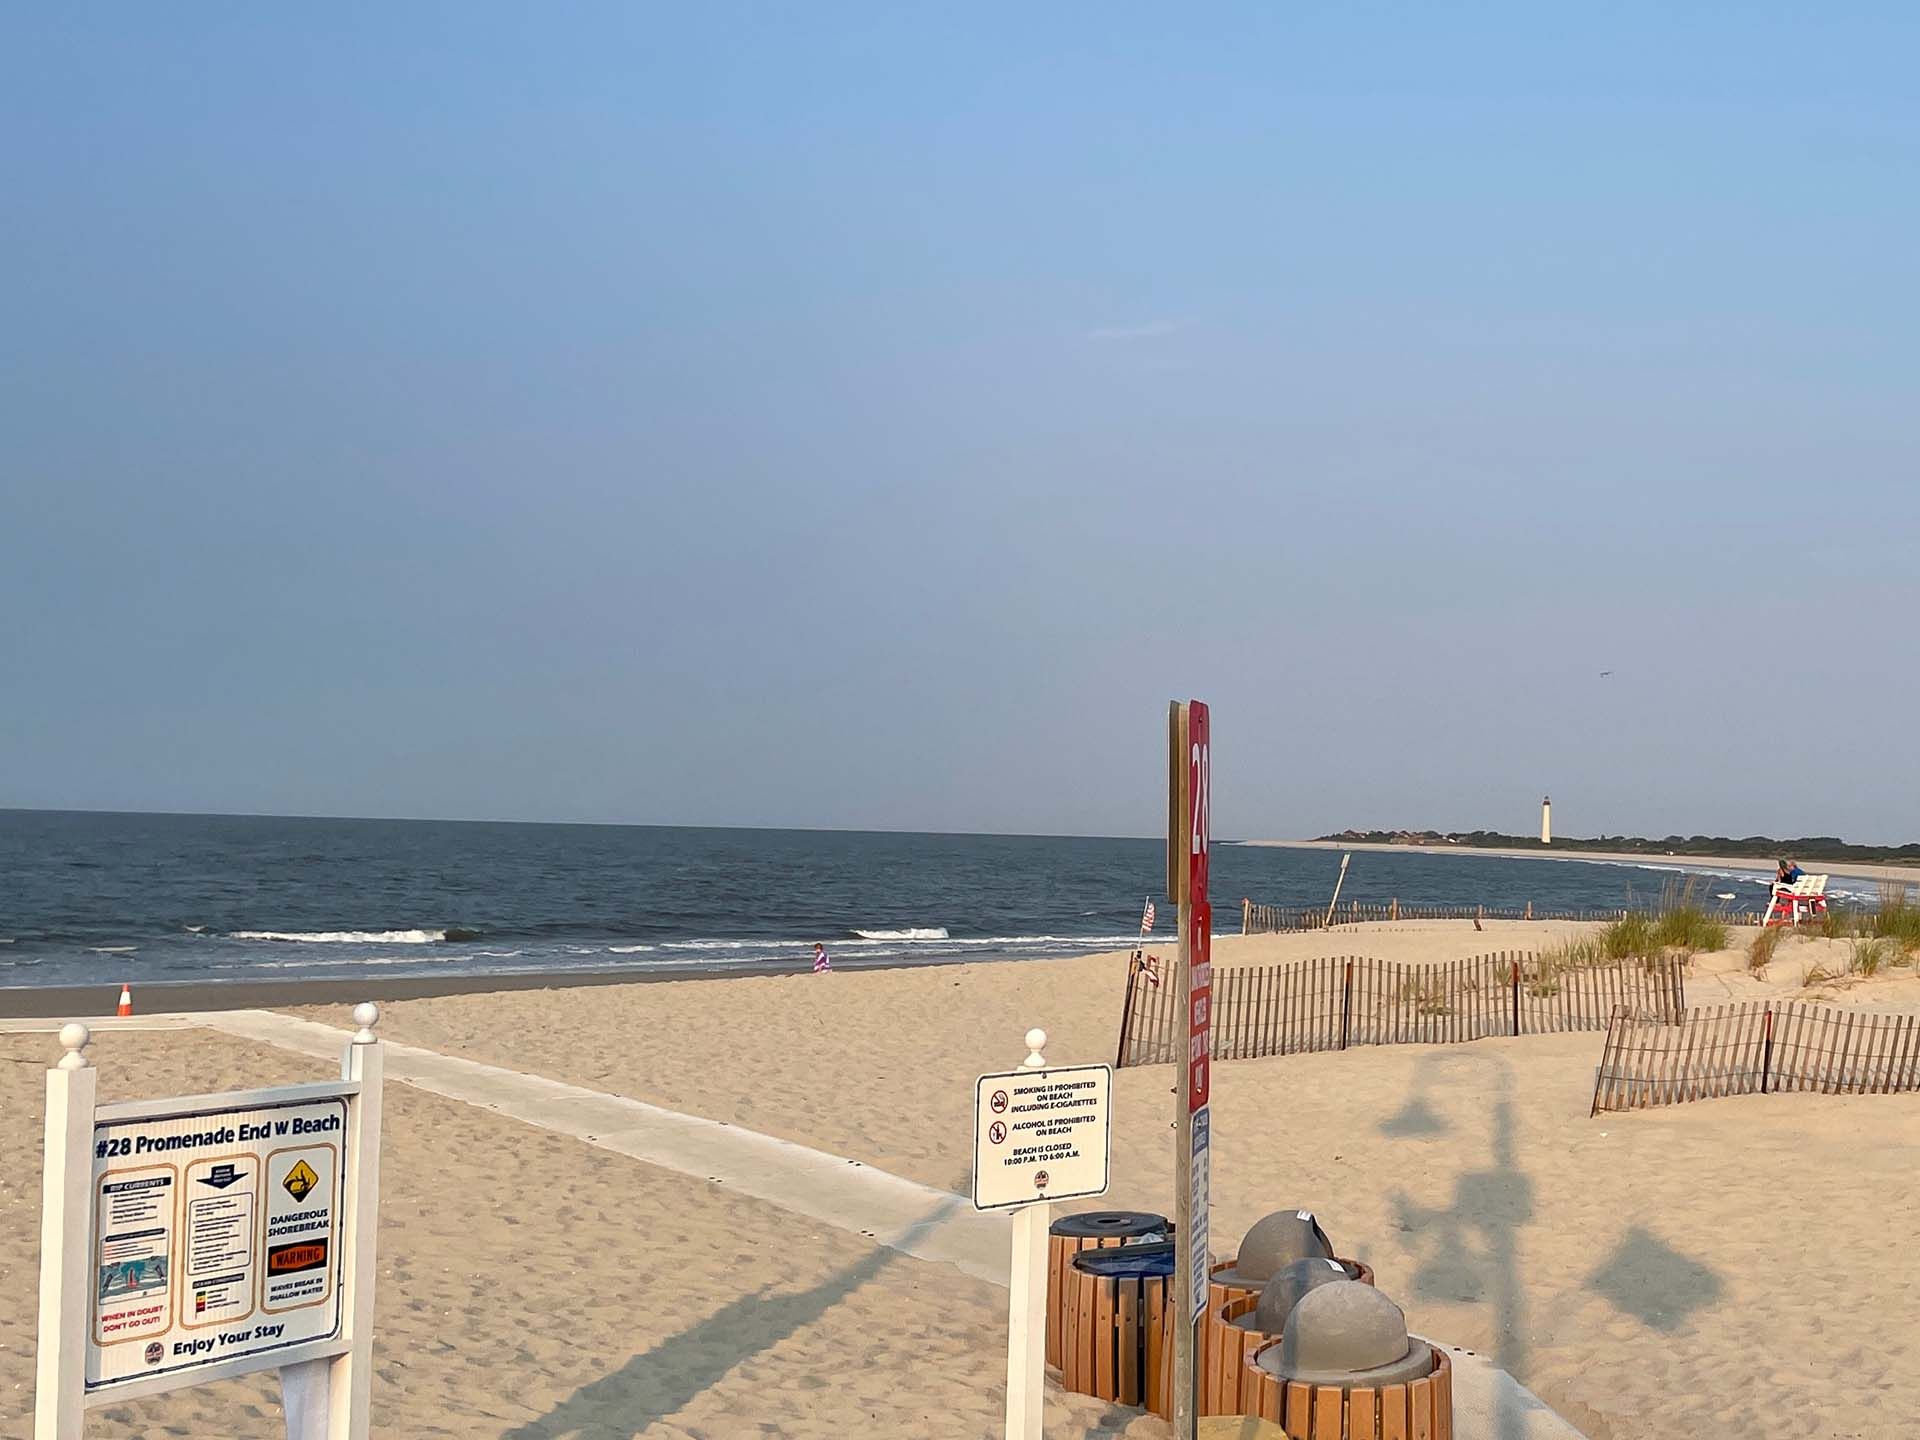 The Jersey Shore in Cape May, New Jersey